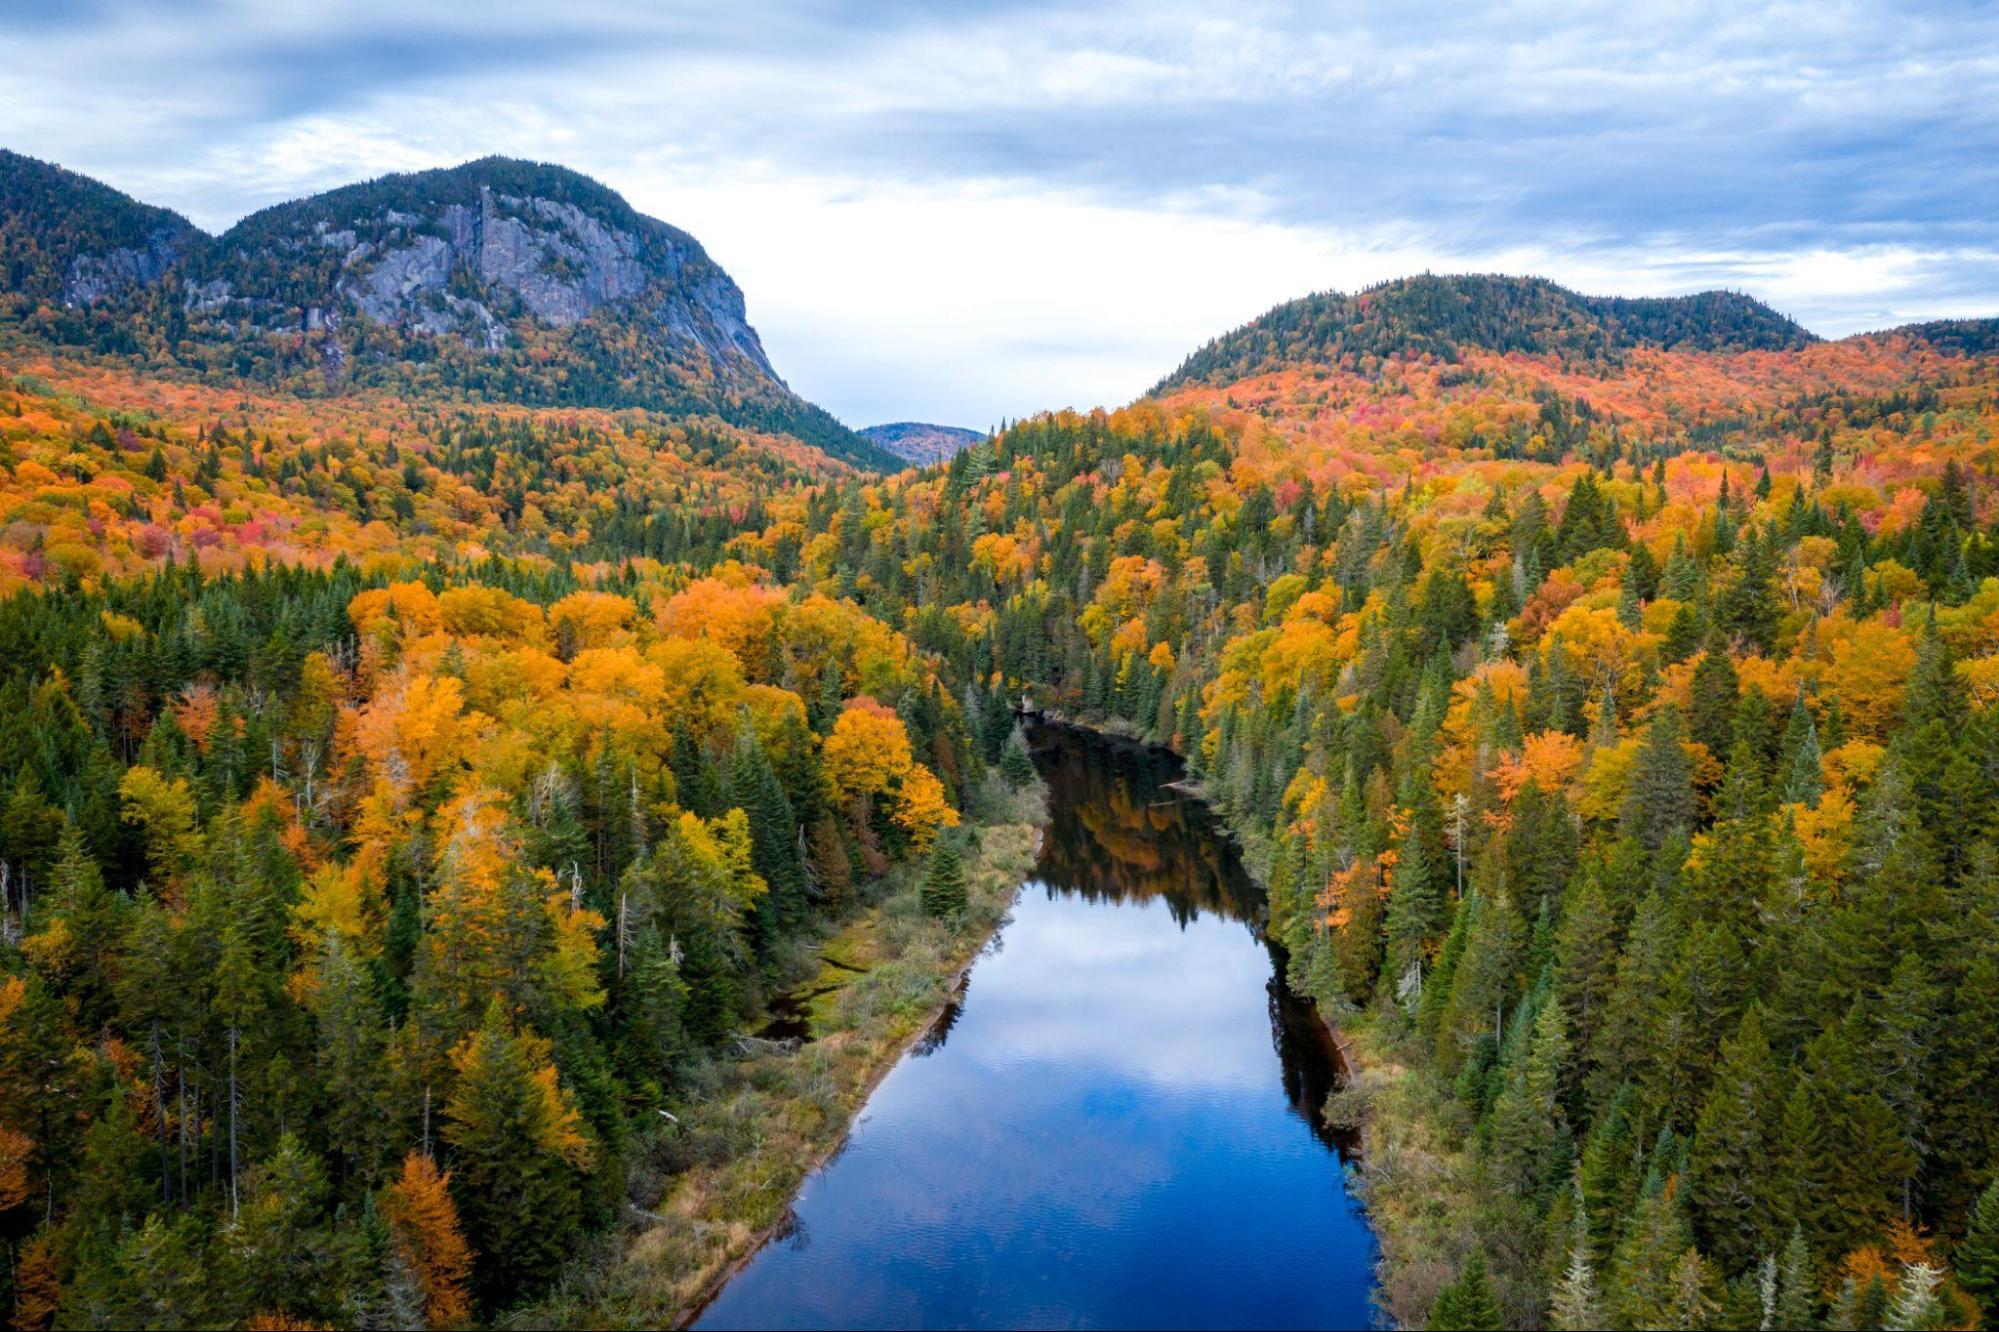 Canada's boreal forest during the autumn season